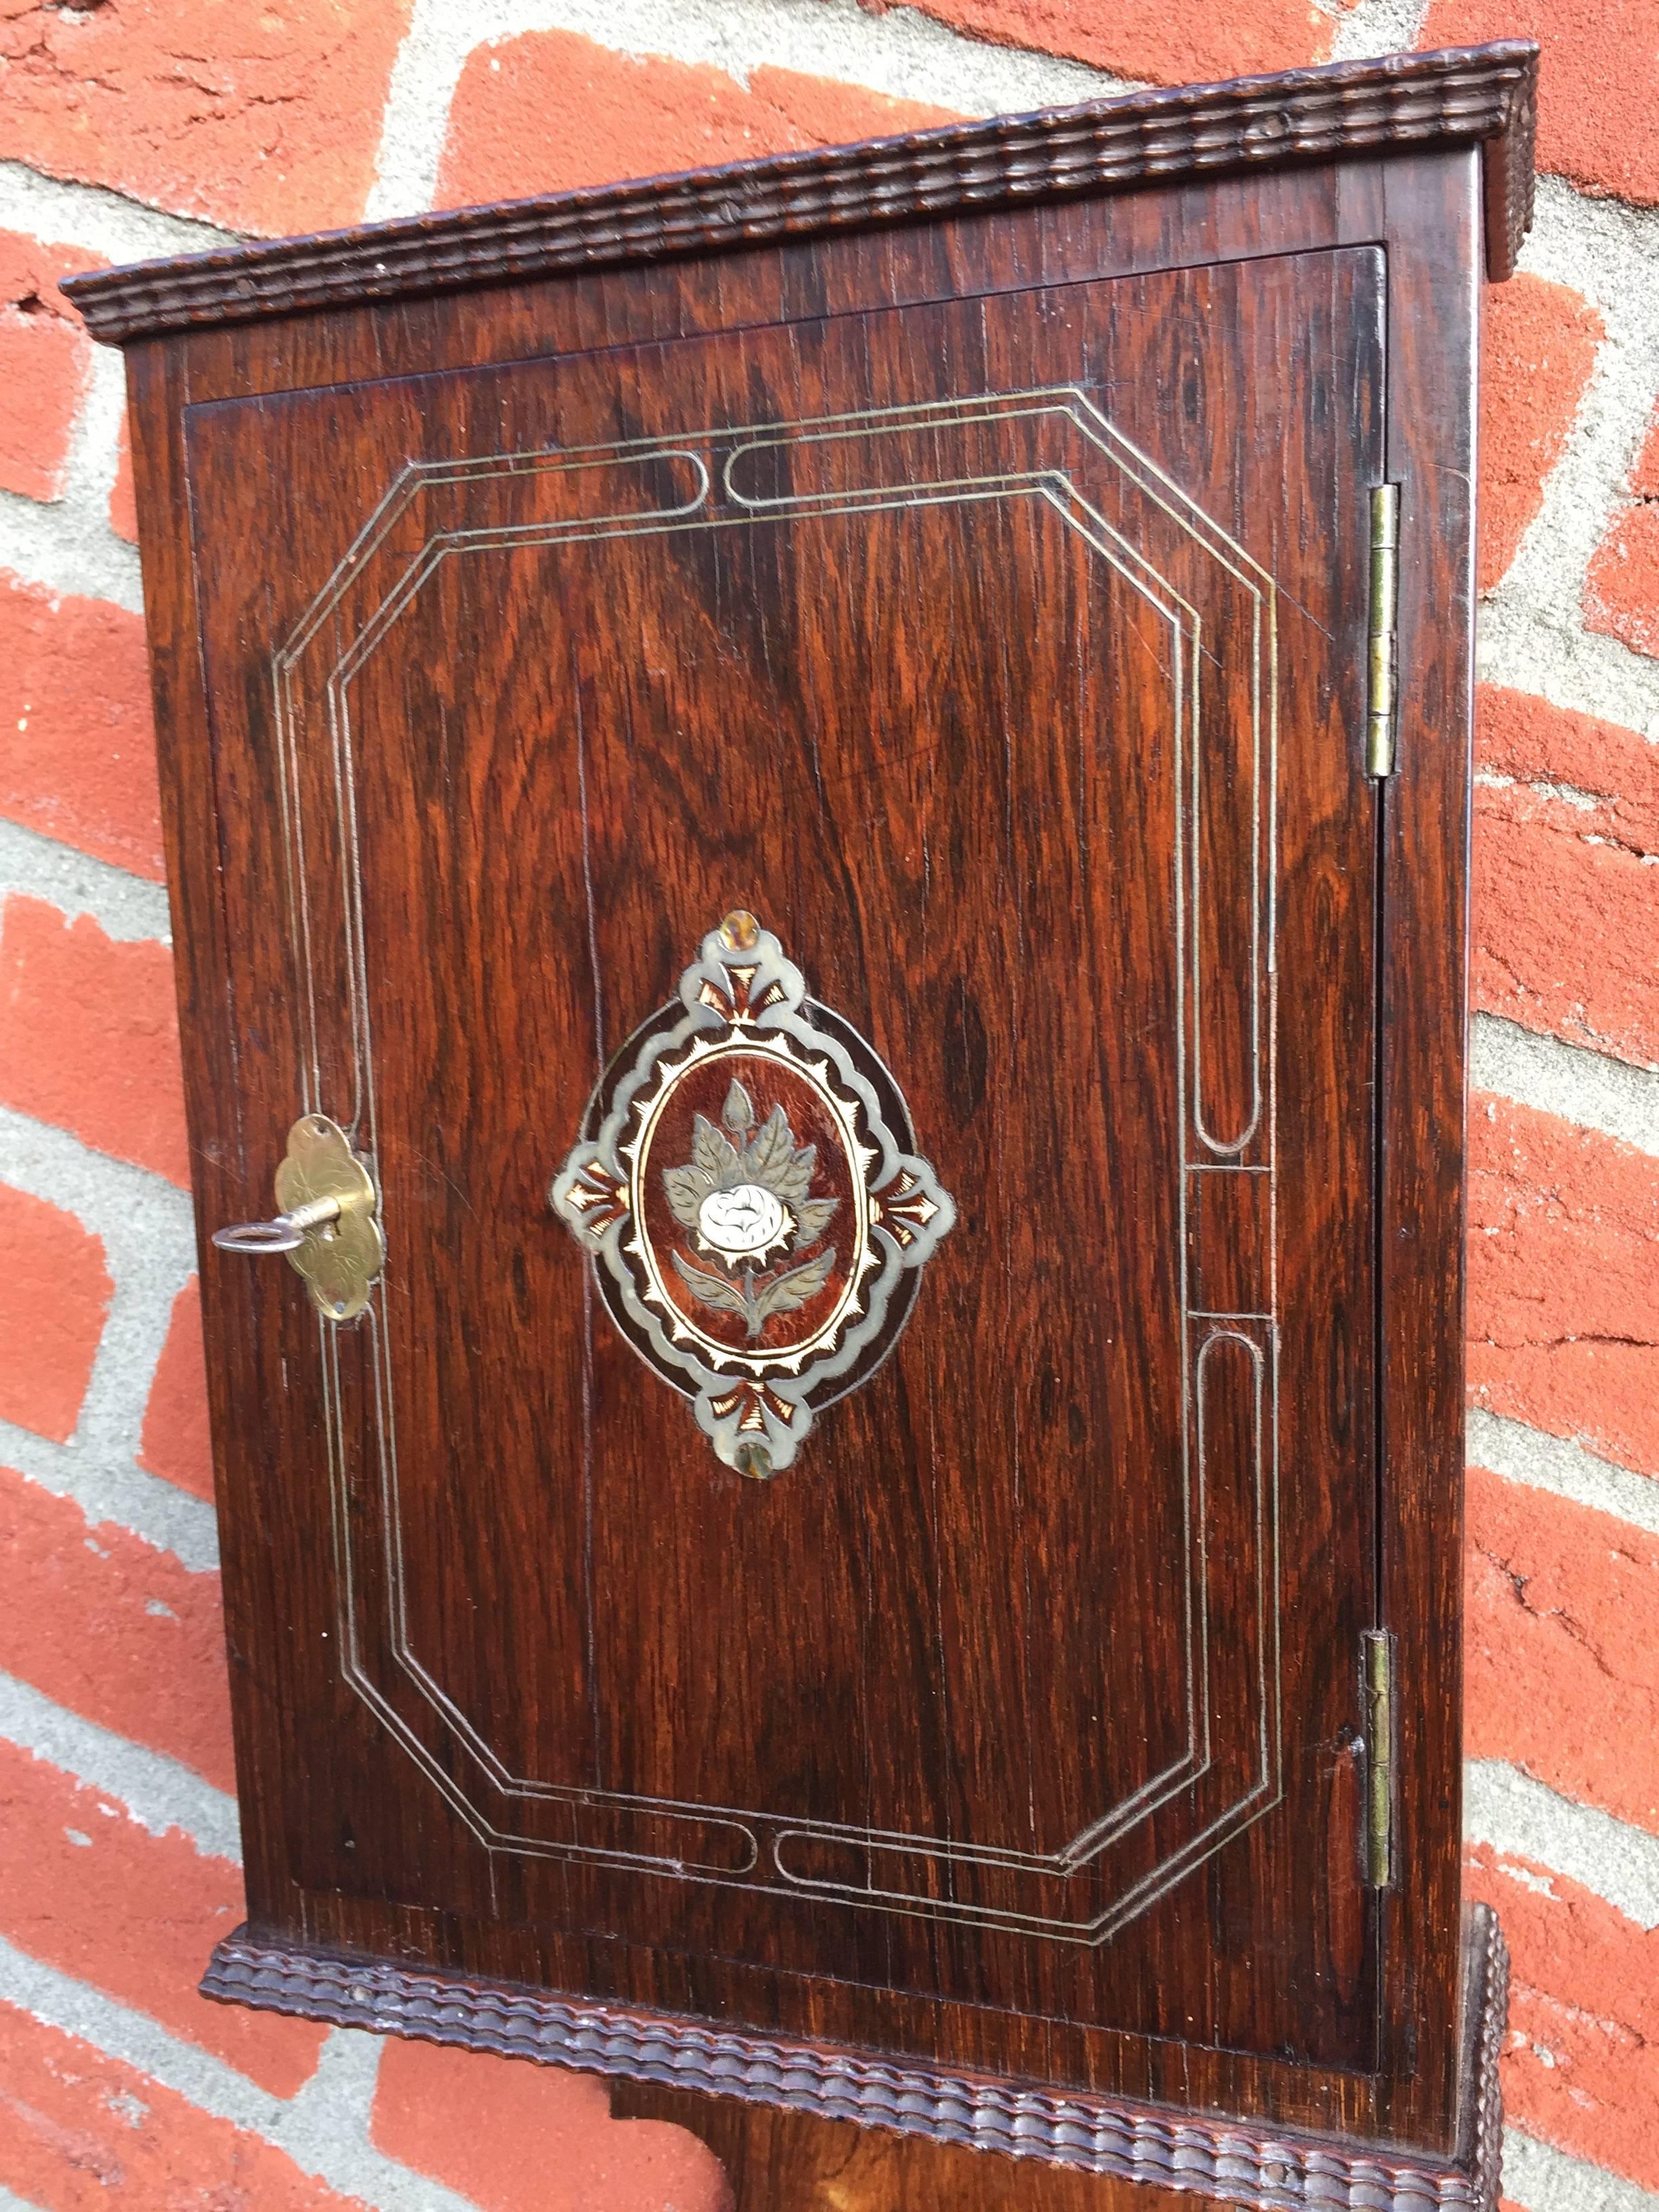 This antique key cabinet is in completely original condition.

Easy to mount on the wall you will have a rare and practical 'key organizer'. This beautifully veneered wall cabinet comes with an inlaid medaillion in the center of the door. The